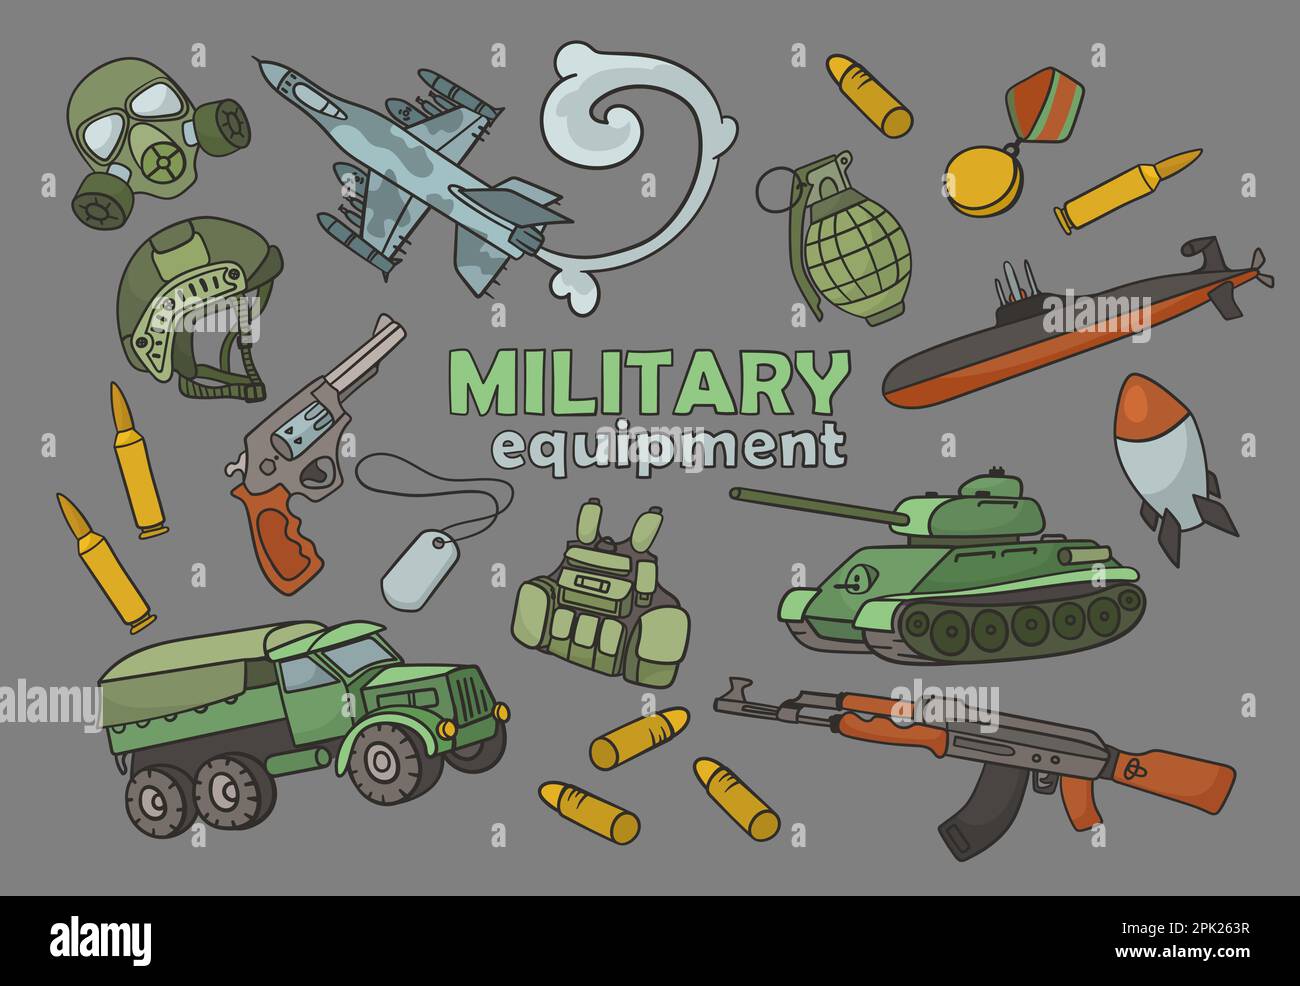 Colorful doodle military equipment cartoon illustration set Stock Vector